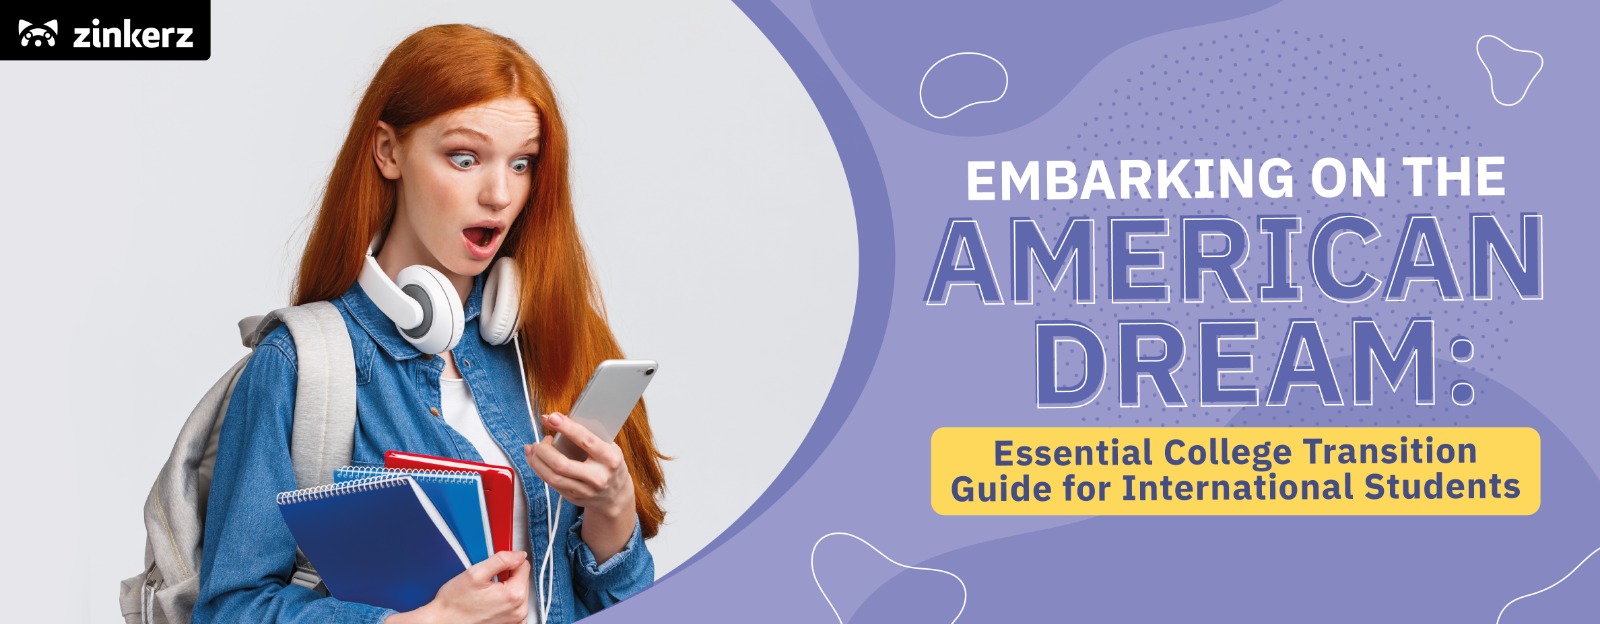 Embarking on the American Dream: Essential College Transition Guide for International Students